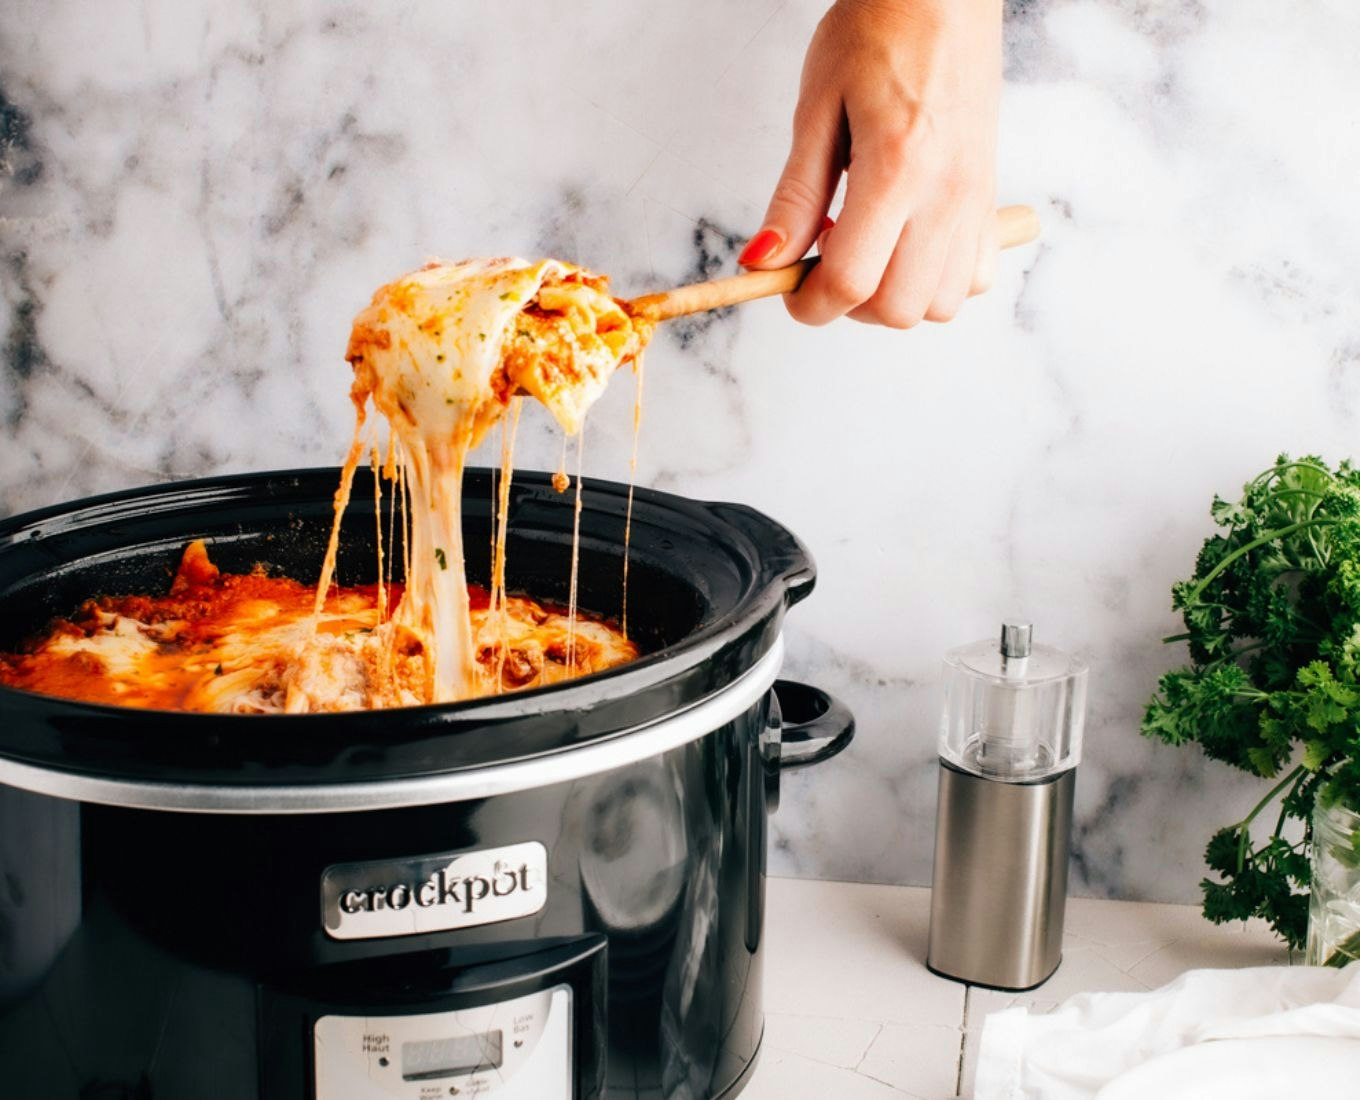 Tips to Making The Best Crock-Pot® Meals In Your Slow Cooker